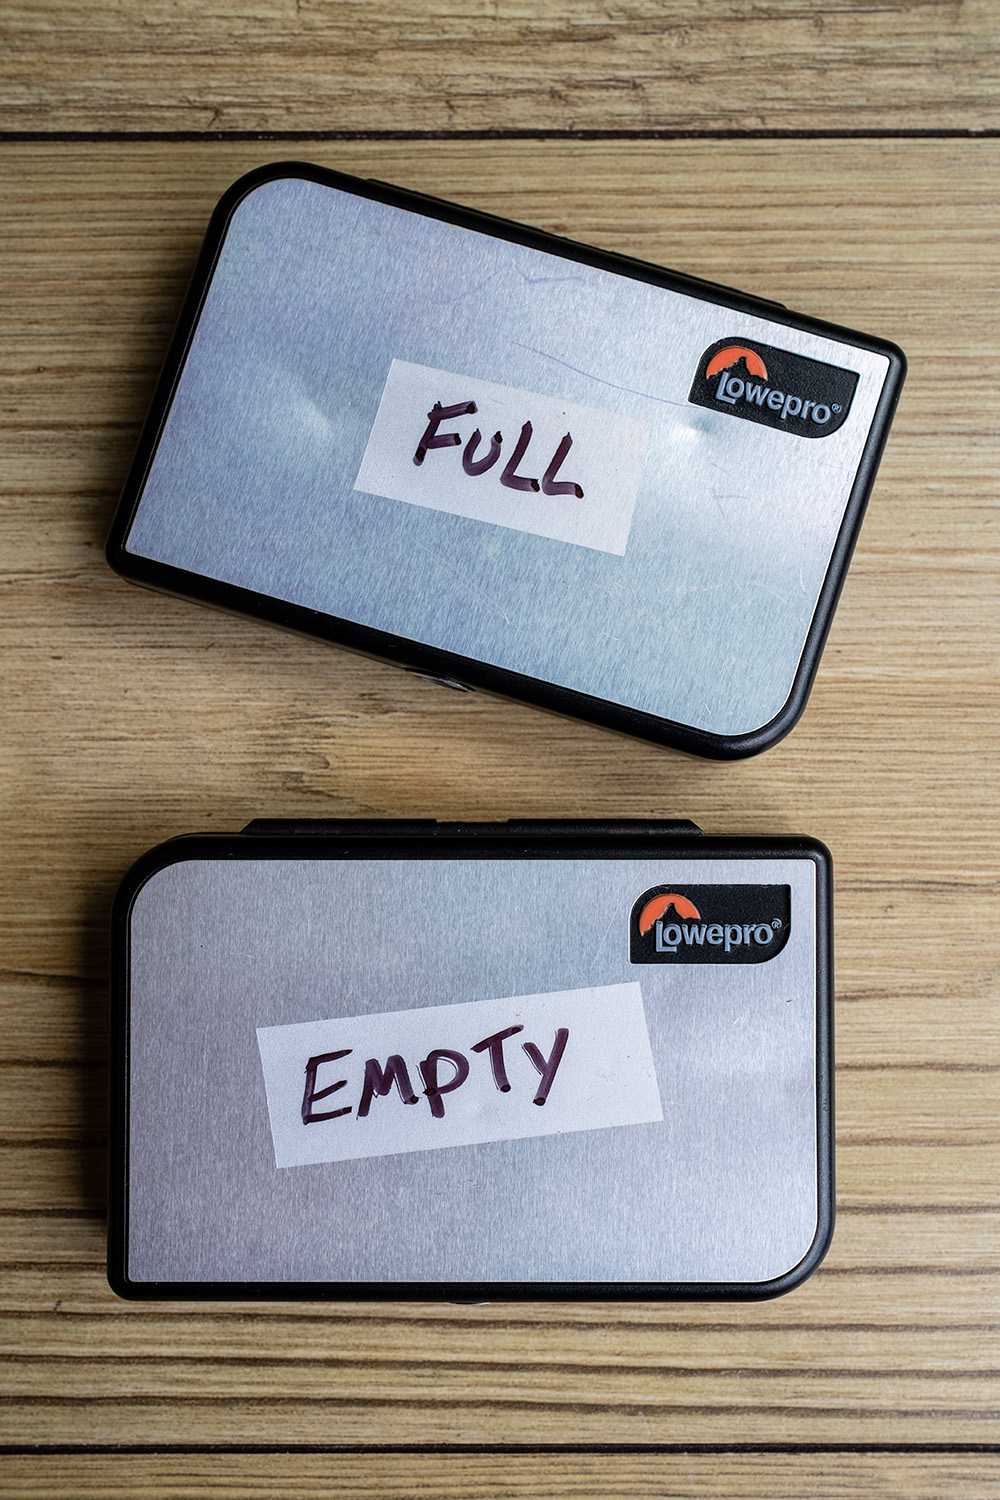 Use labelled memory card cases